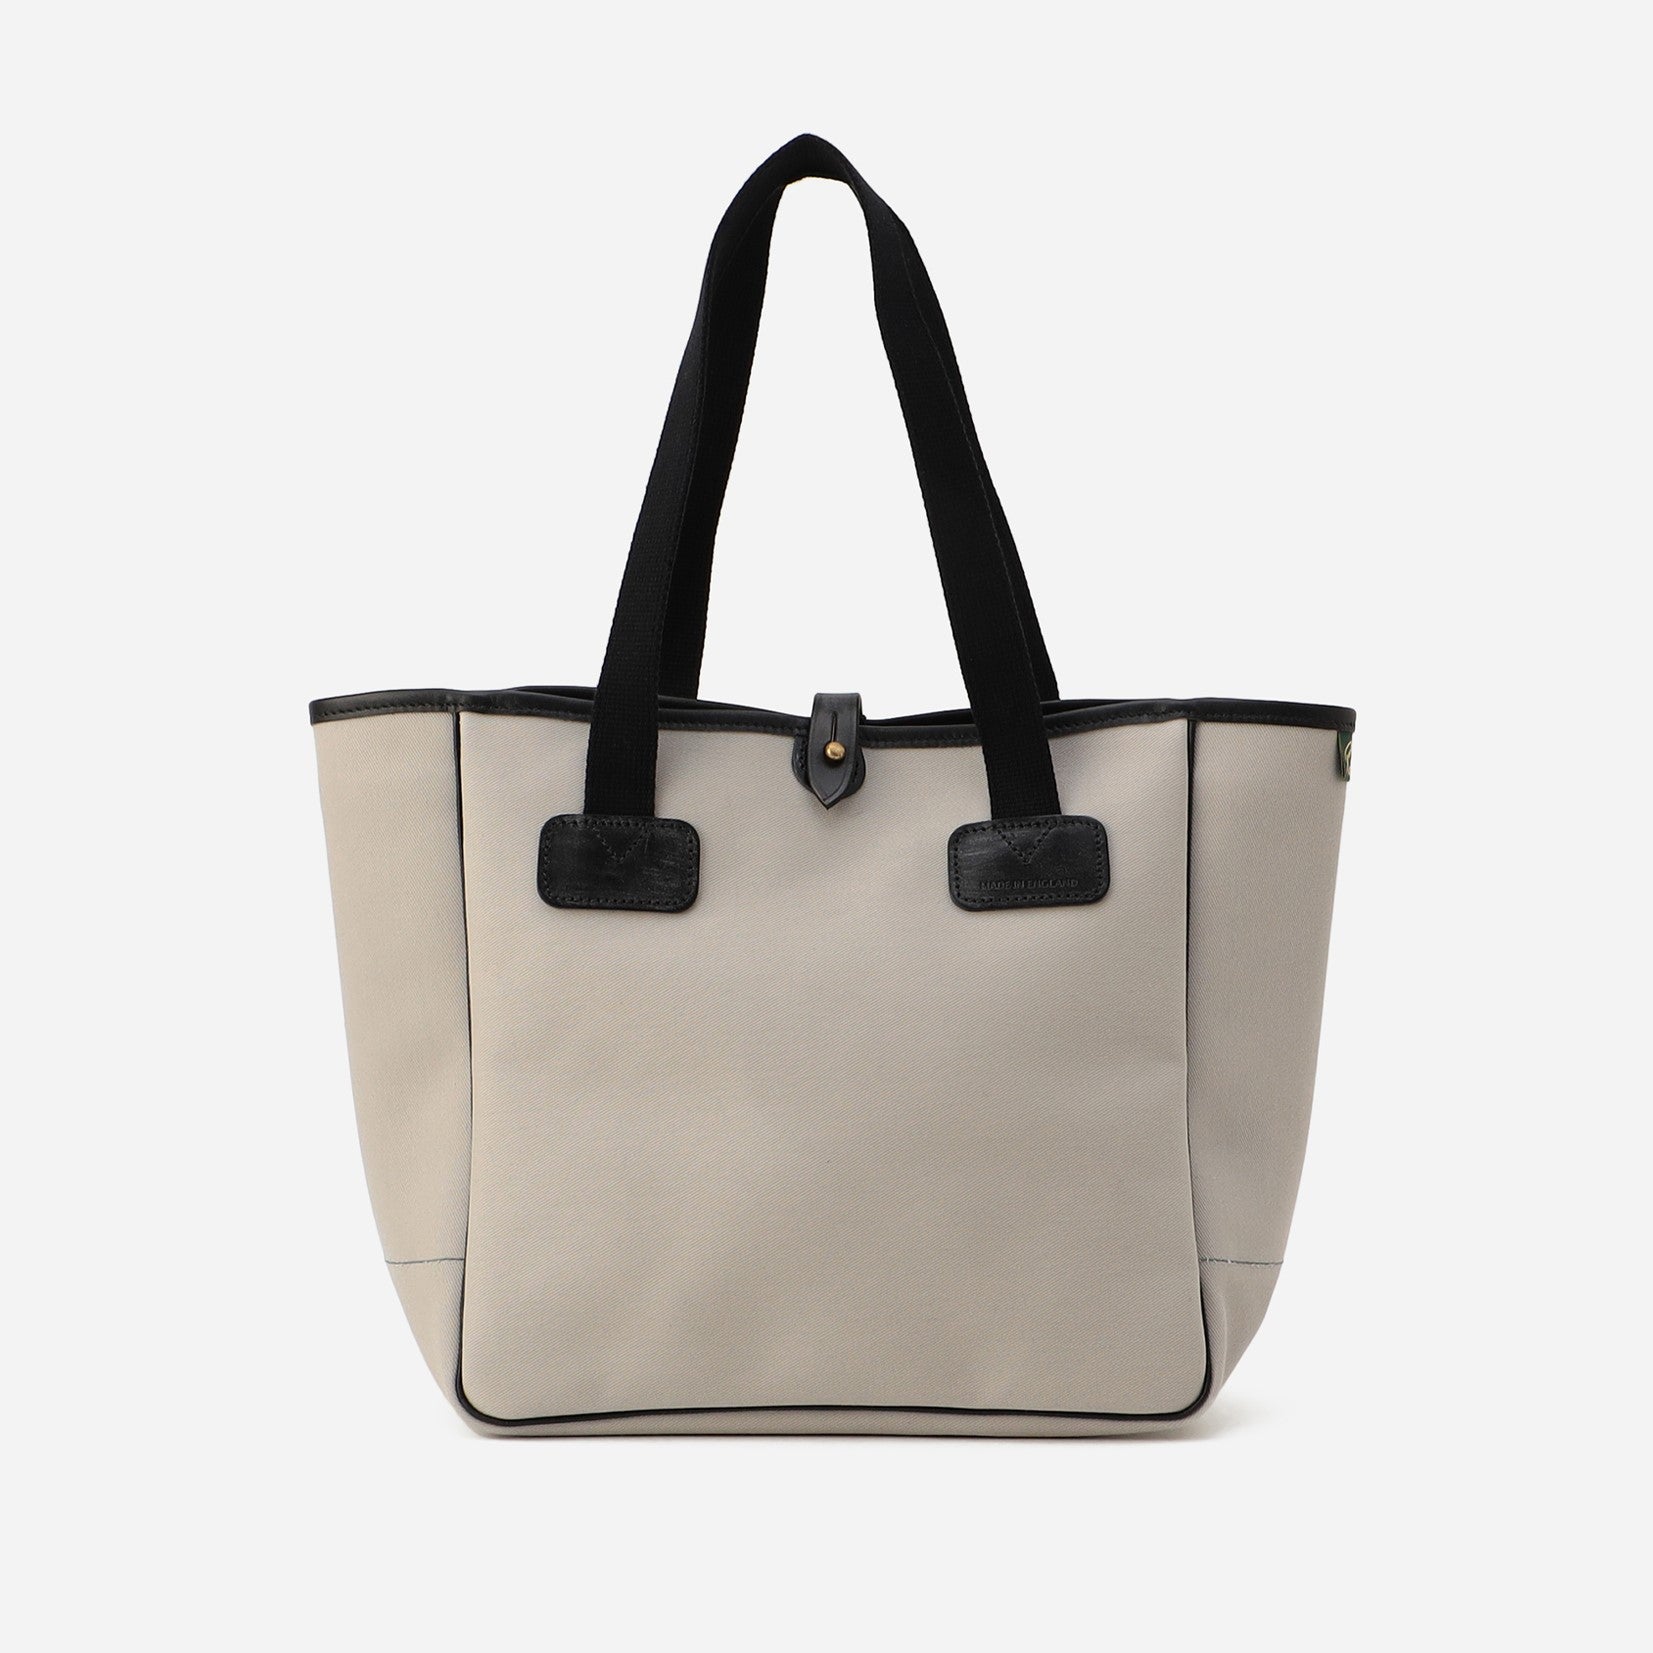 EXTRA SMALL CARRYALL